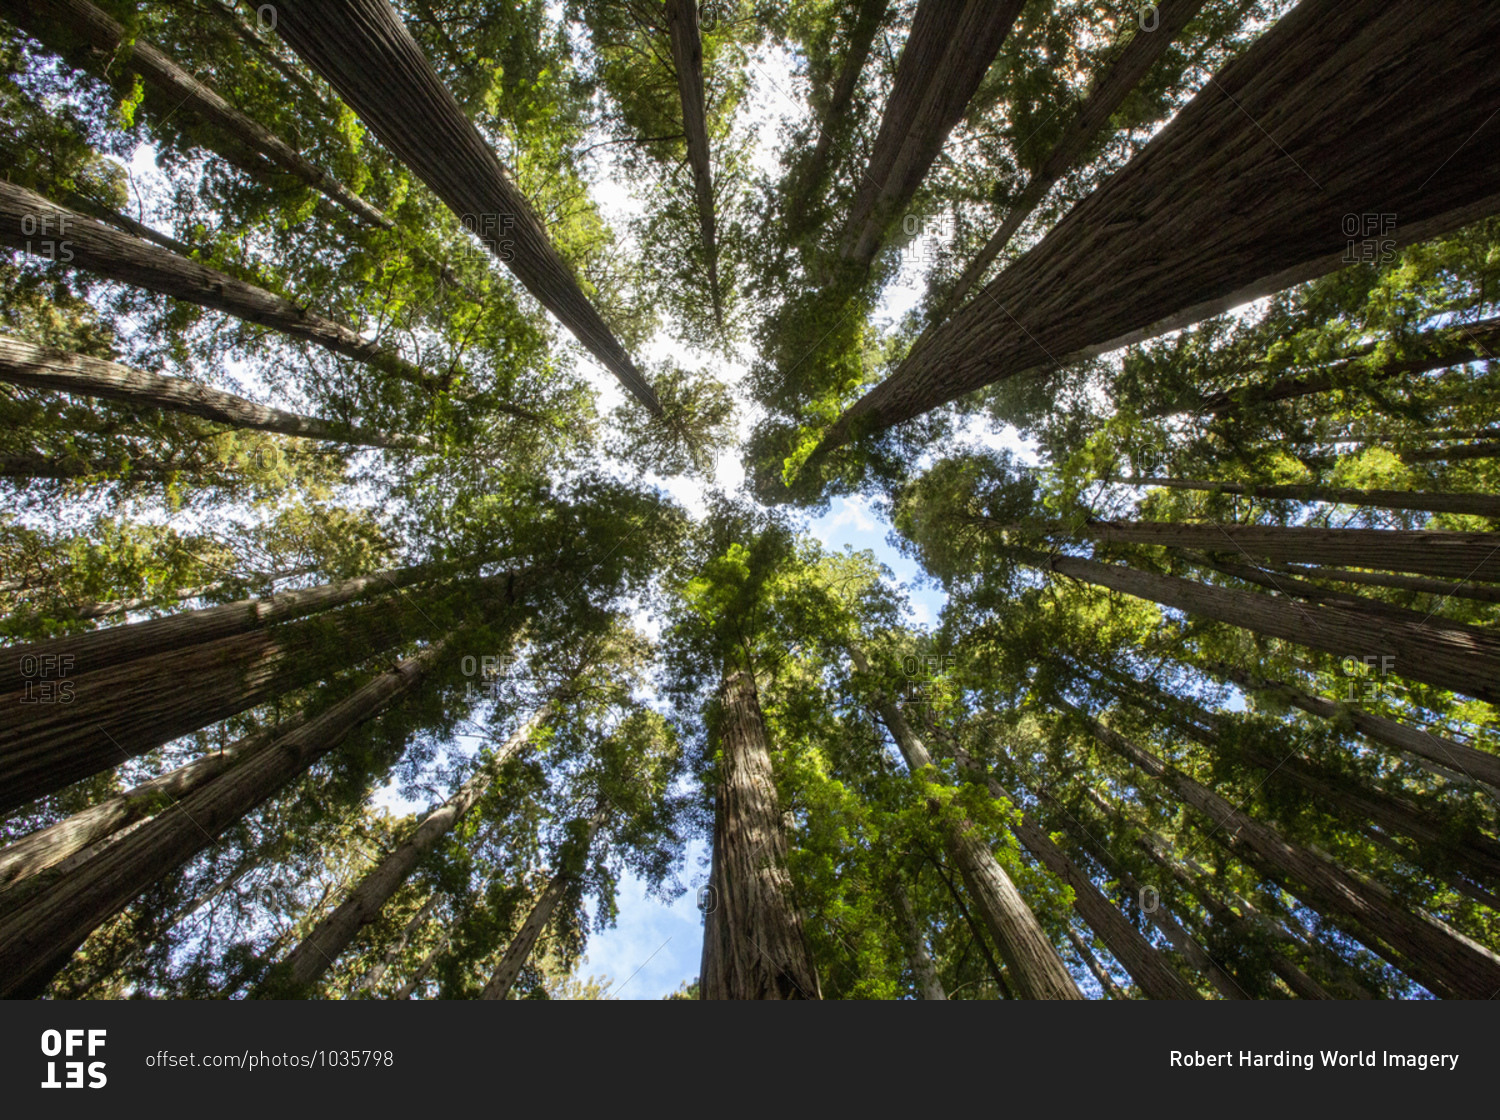 Among giant redwoods on the Boy Scout Tree Trail in Jedediah Smith Redwoods State Park, UNESCO World Heritage Site, California, United States of America, North America